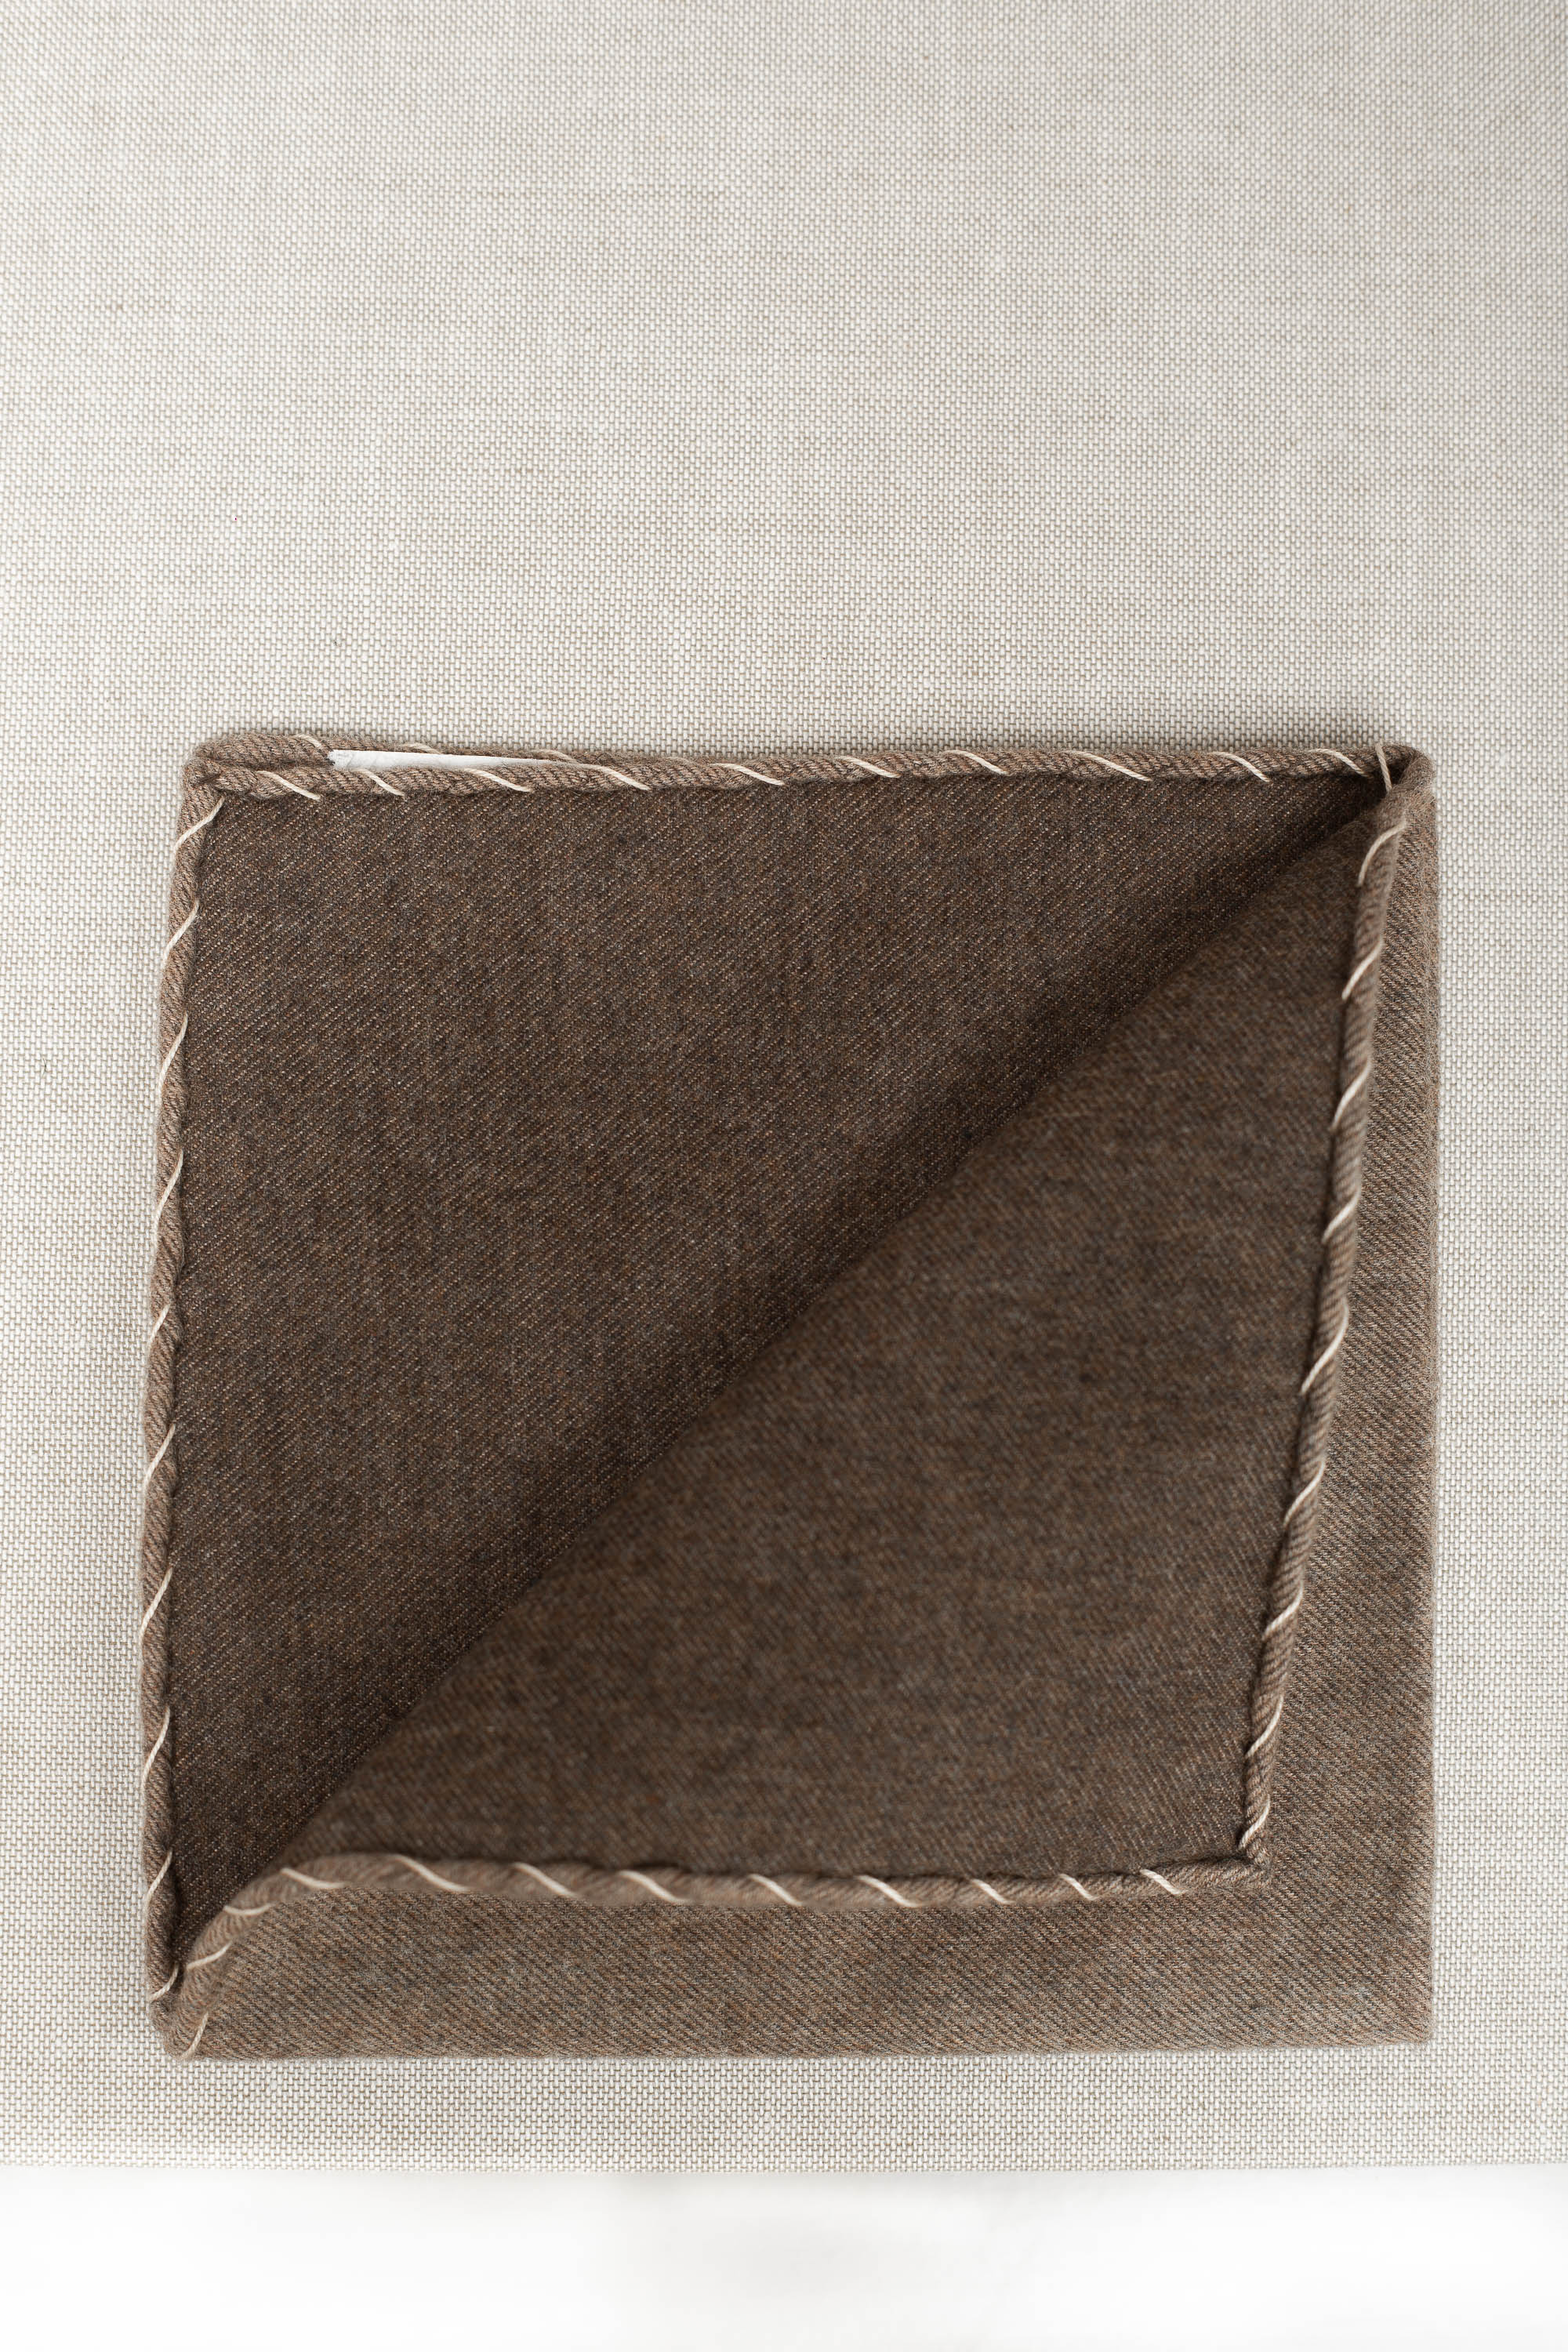 Taupe flannel cotton pocket square with beige edges  - Made in Italy